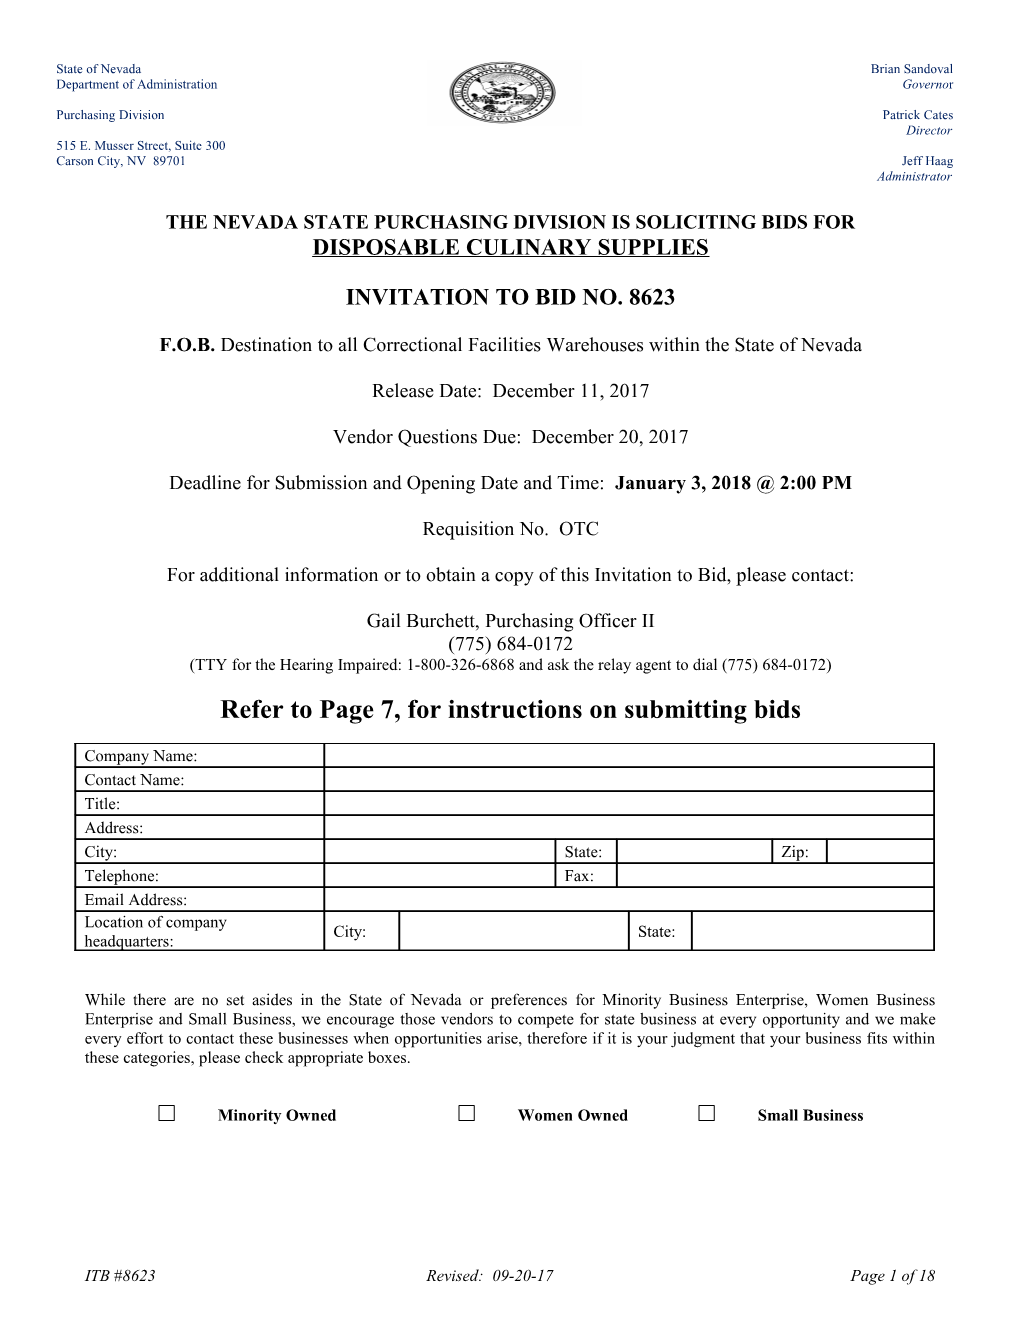 The Nevada State Purchasing Division Is Soliciting Bids For